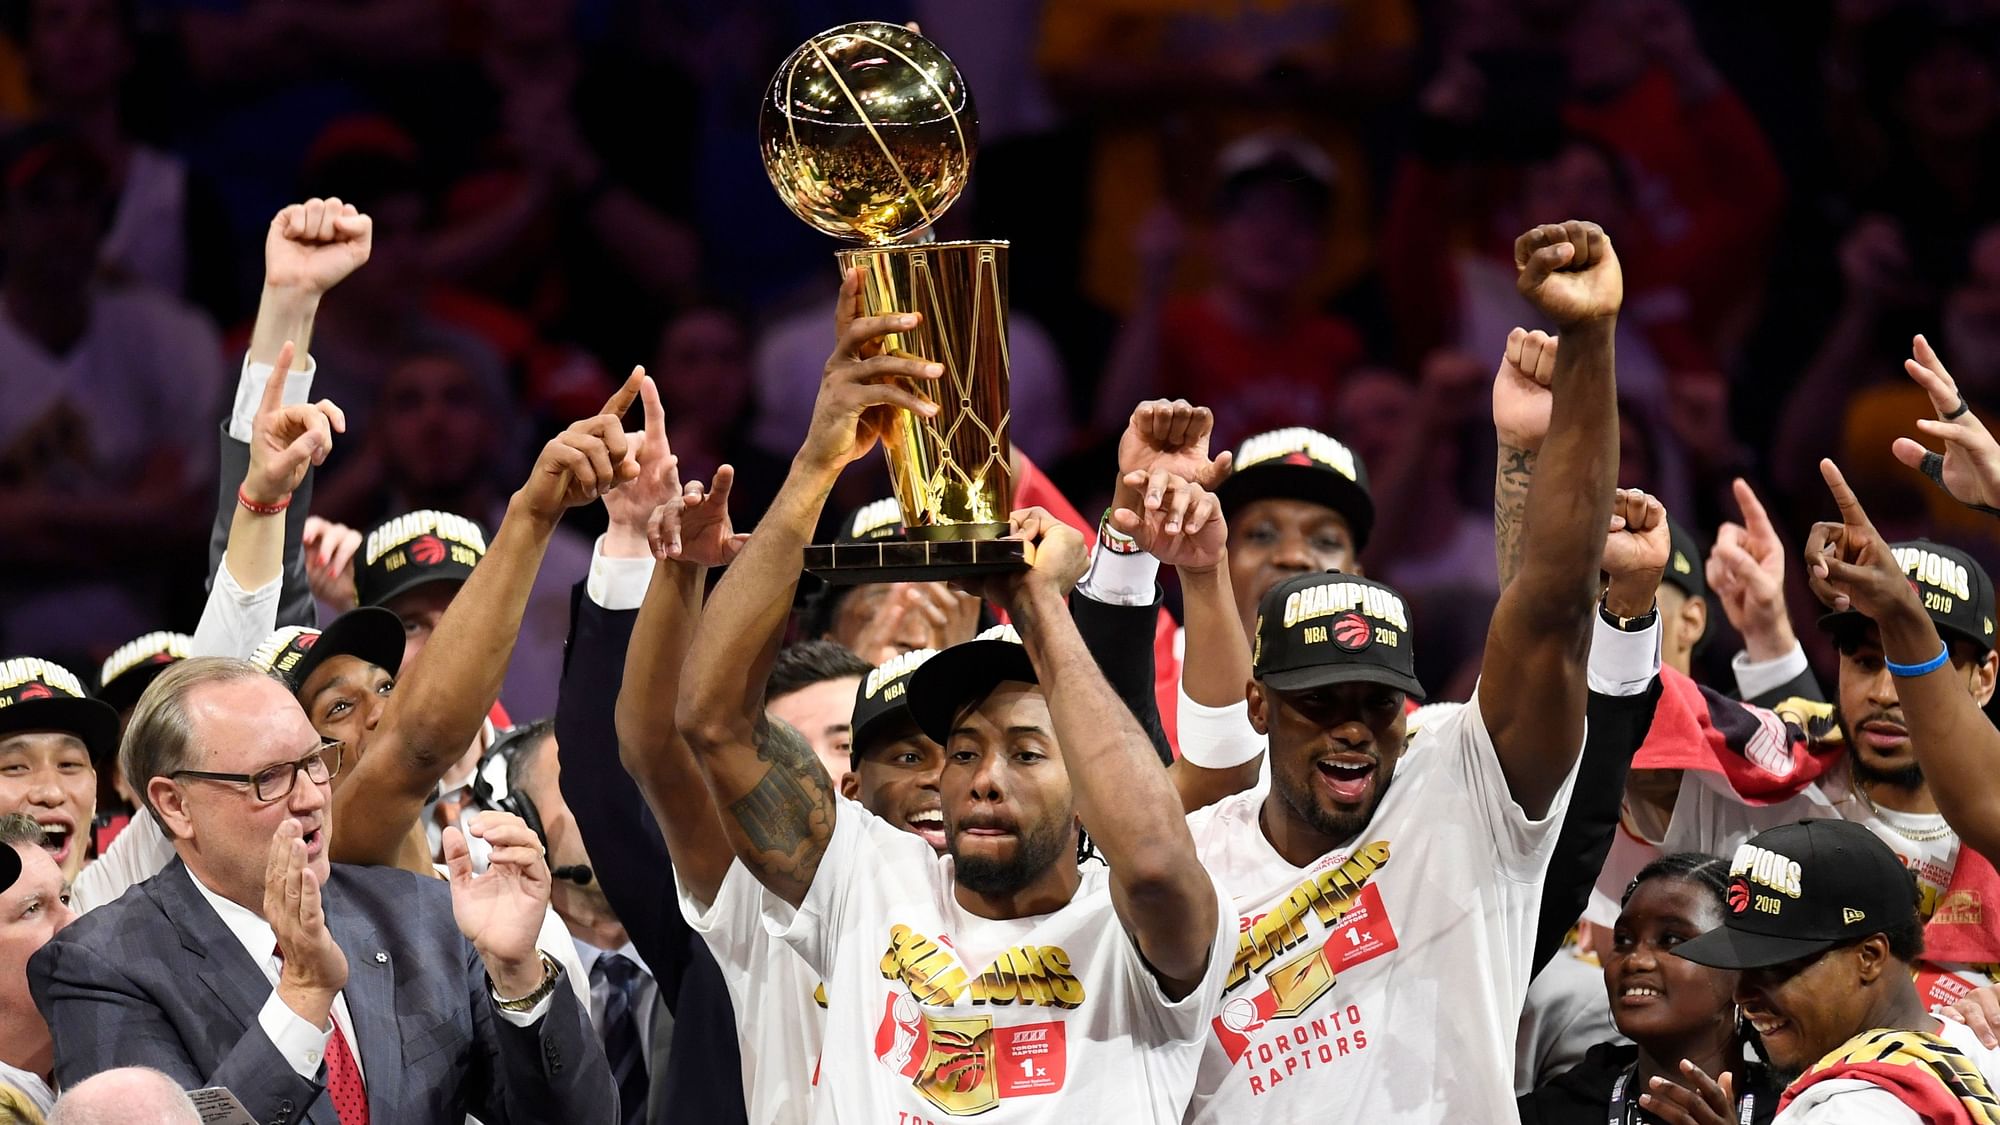 Toronto Raptors captured the Canada’s first major title in 26 years.